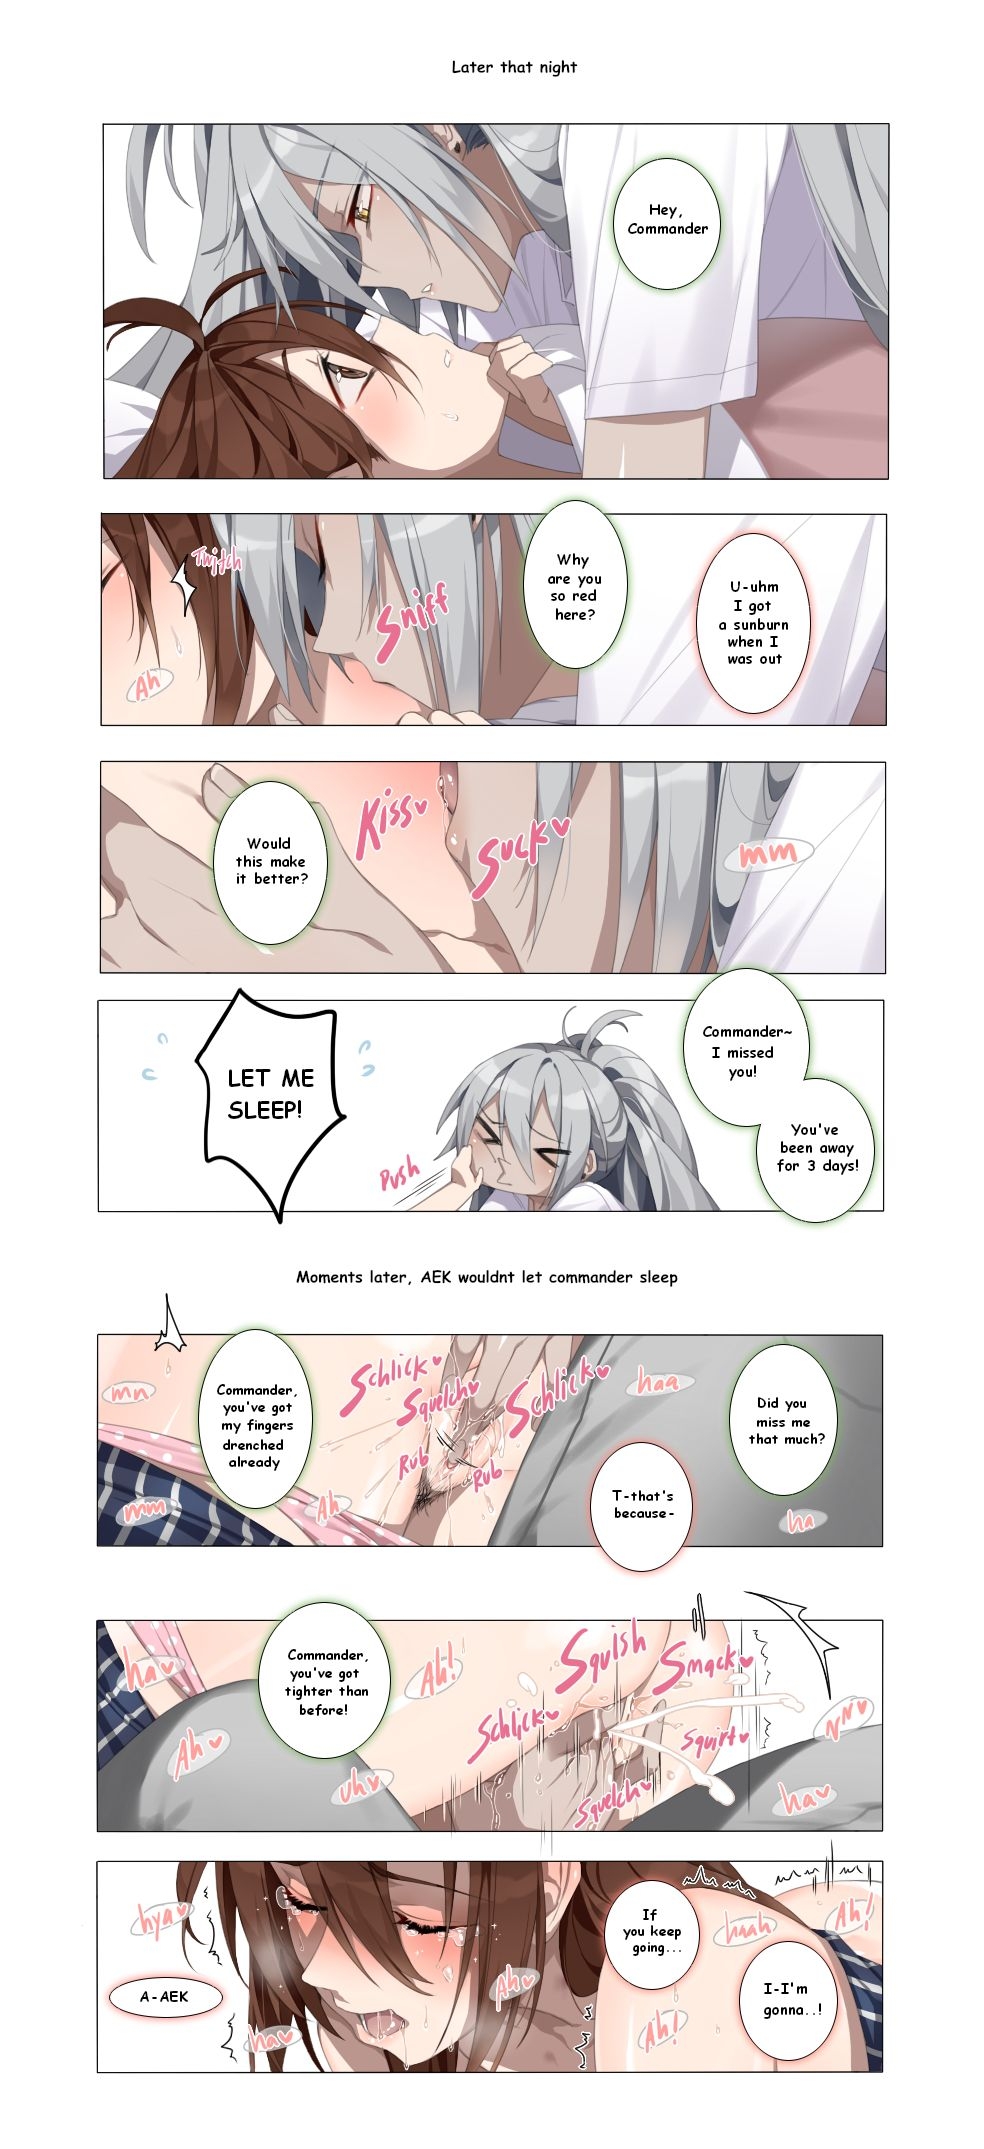 [deathALICE] Time of the Month (Girls' Frontline) [English] 7